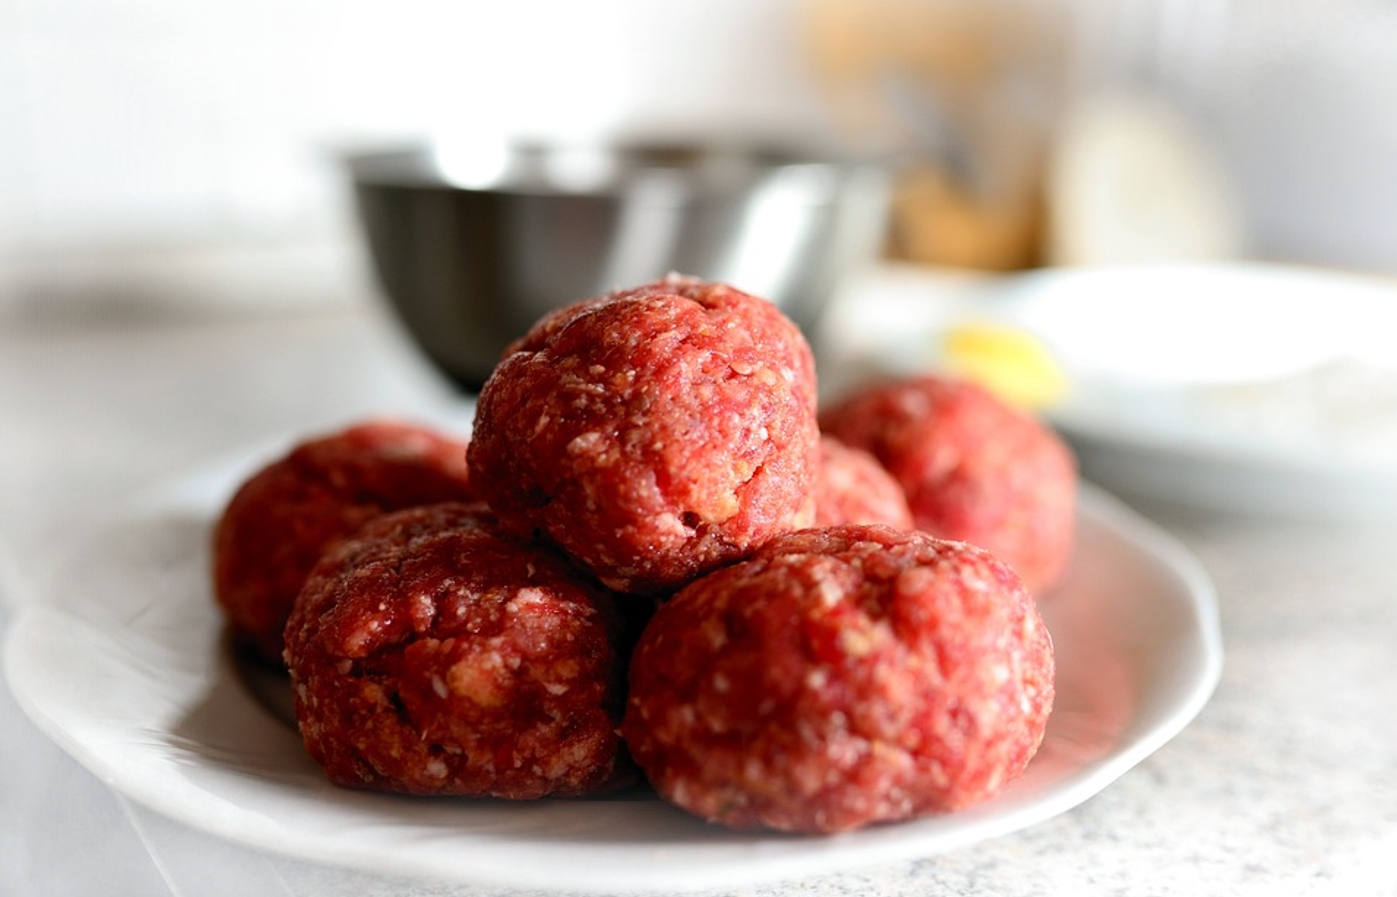 Juicy meatballs for pasta, porridge or potatoes: a must-have for dinner